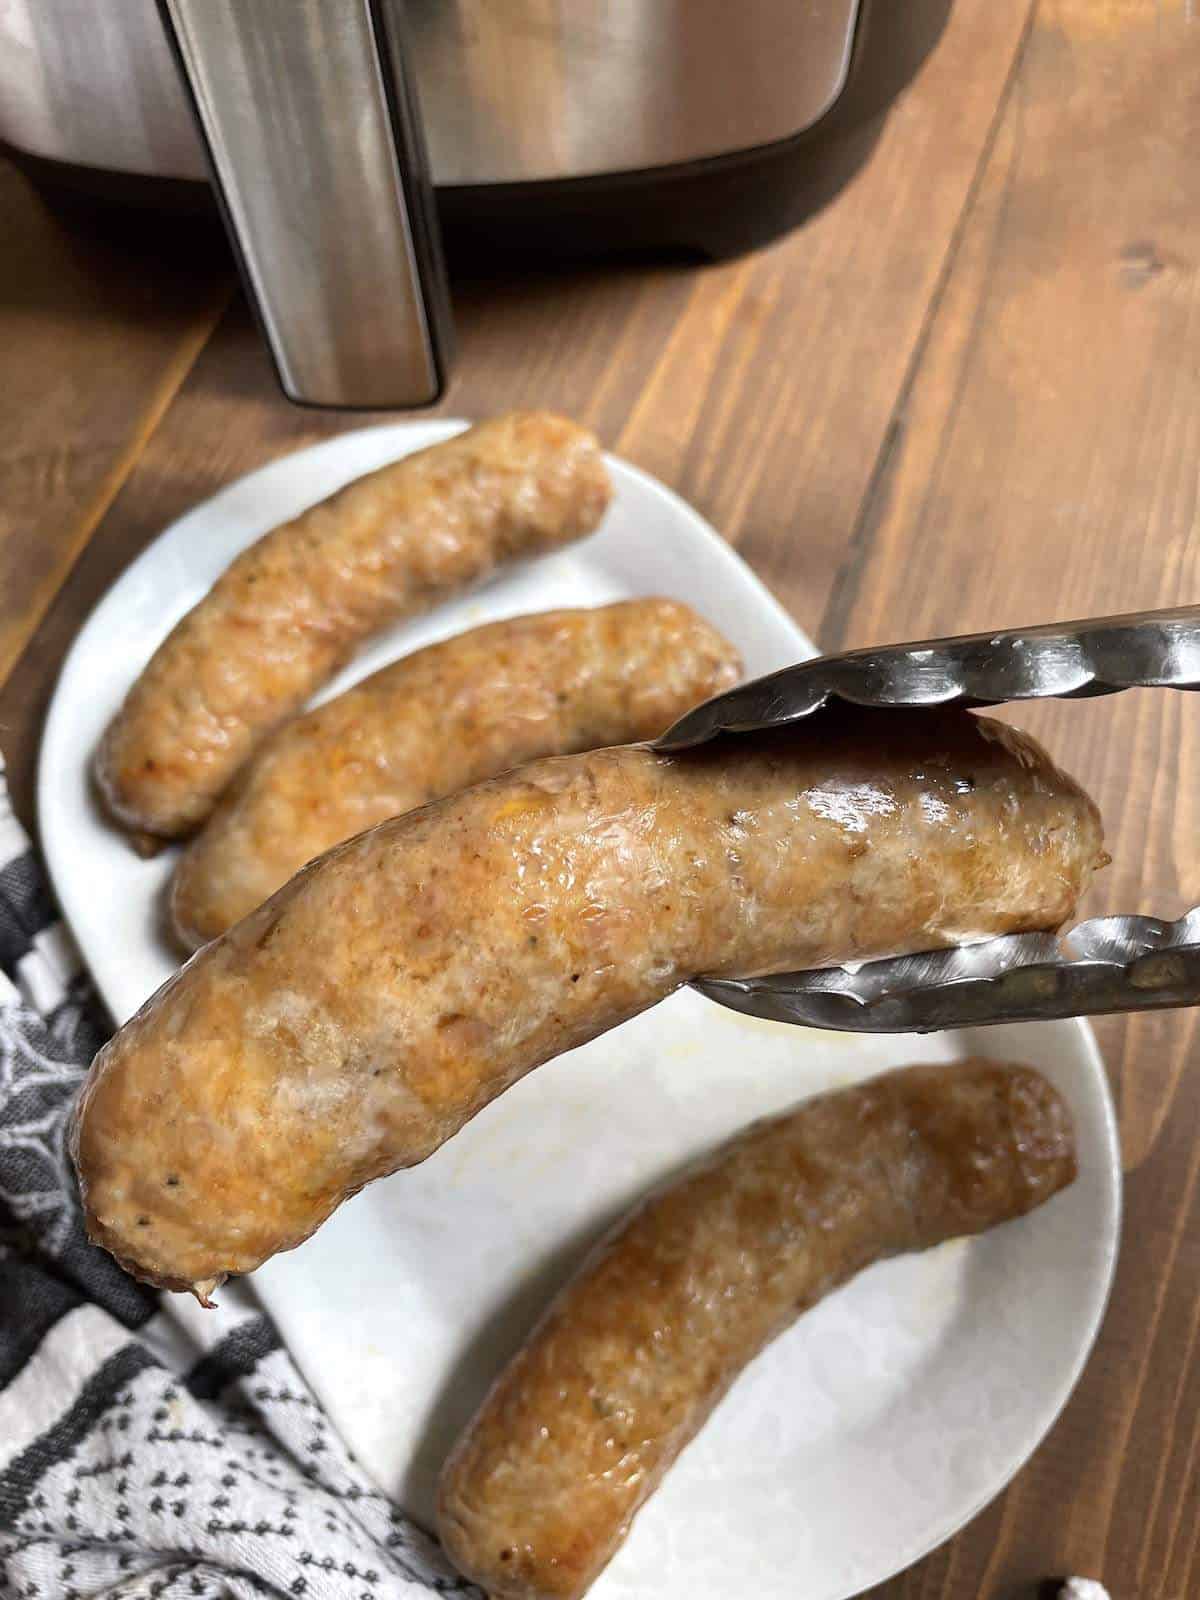 A pair of tongs holding an air fried Italian sausage over a white plate.